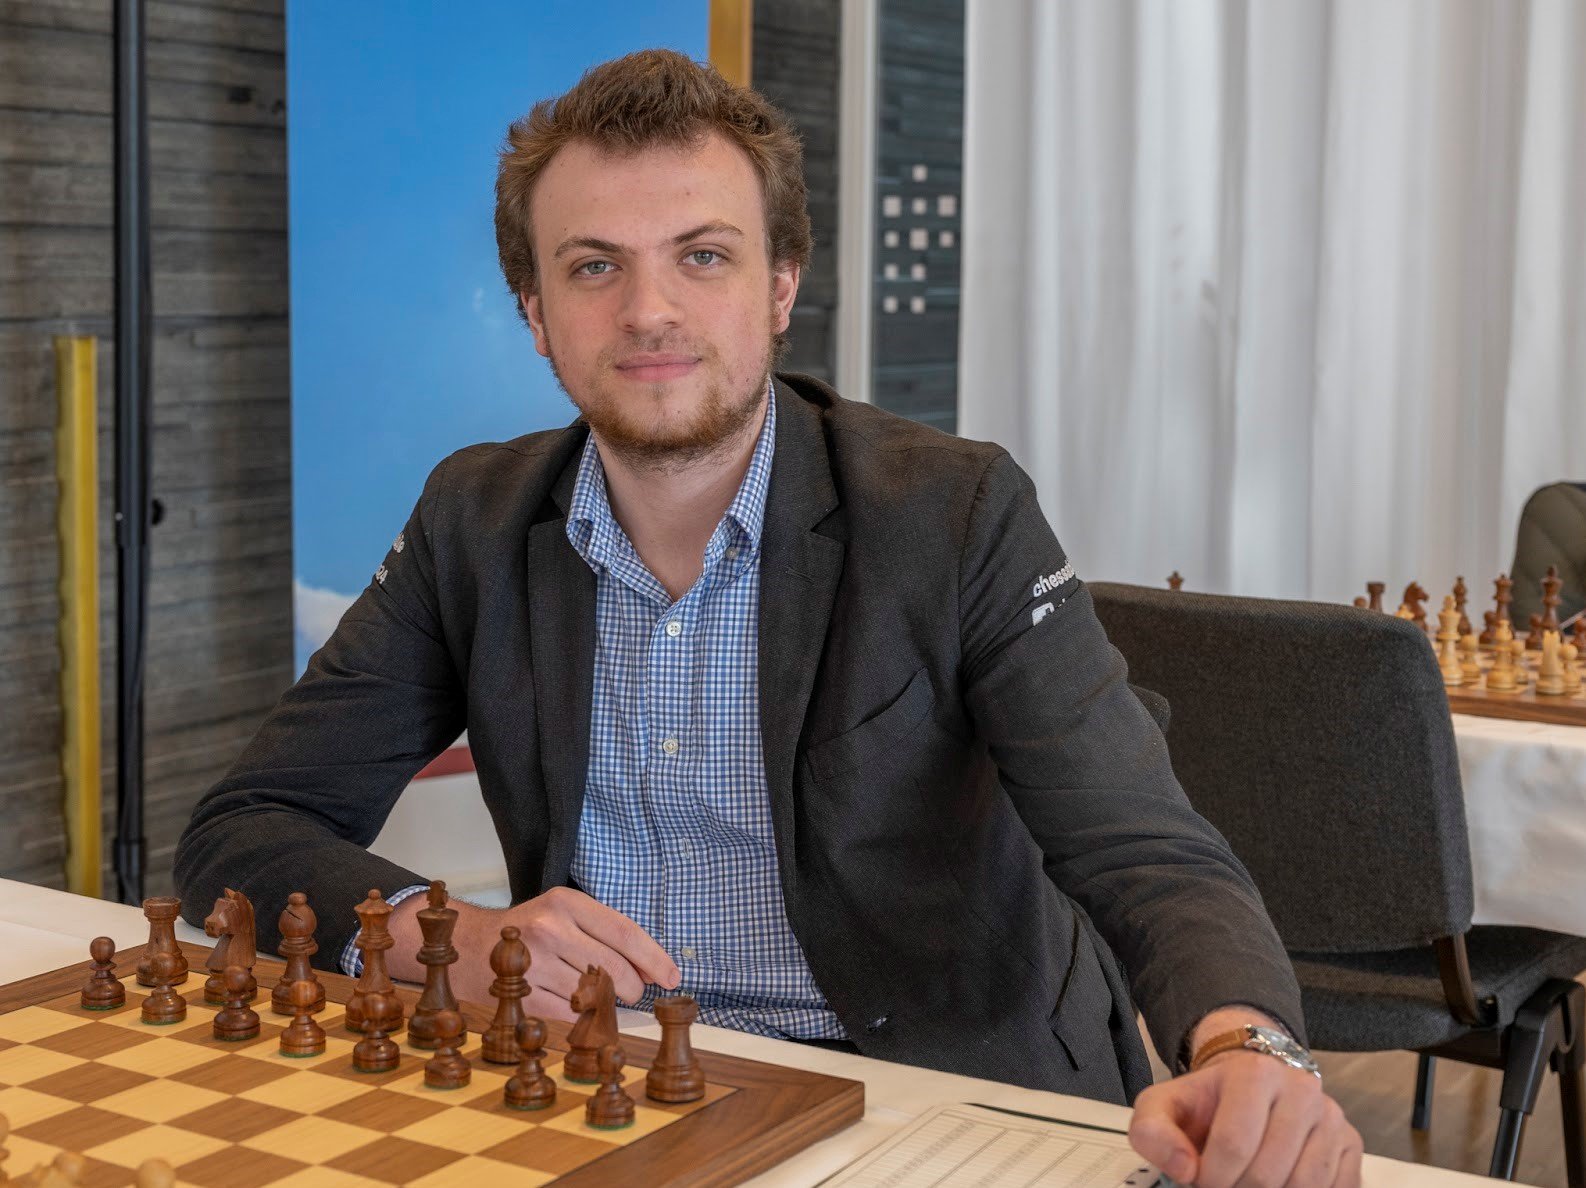 19-year-old grandmaster Hans Niemann 'likely cheated' over '100 times,'  reveals report